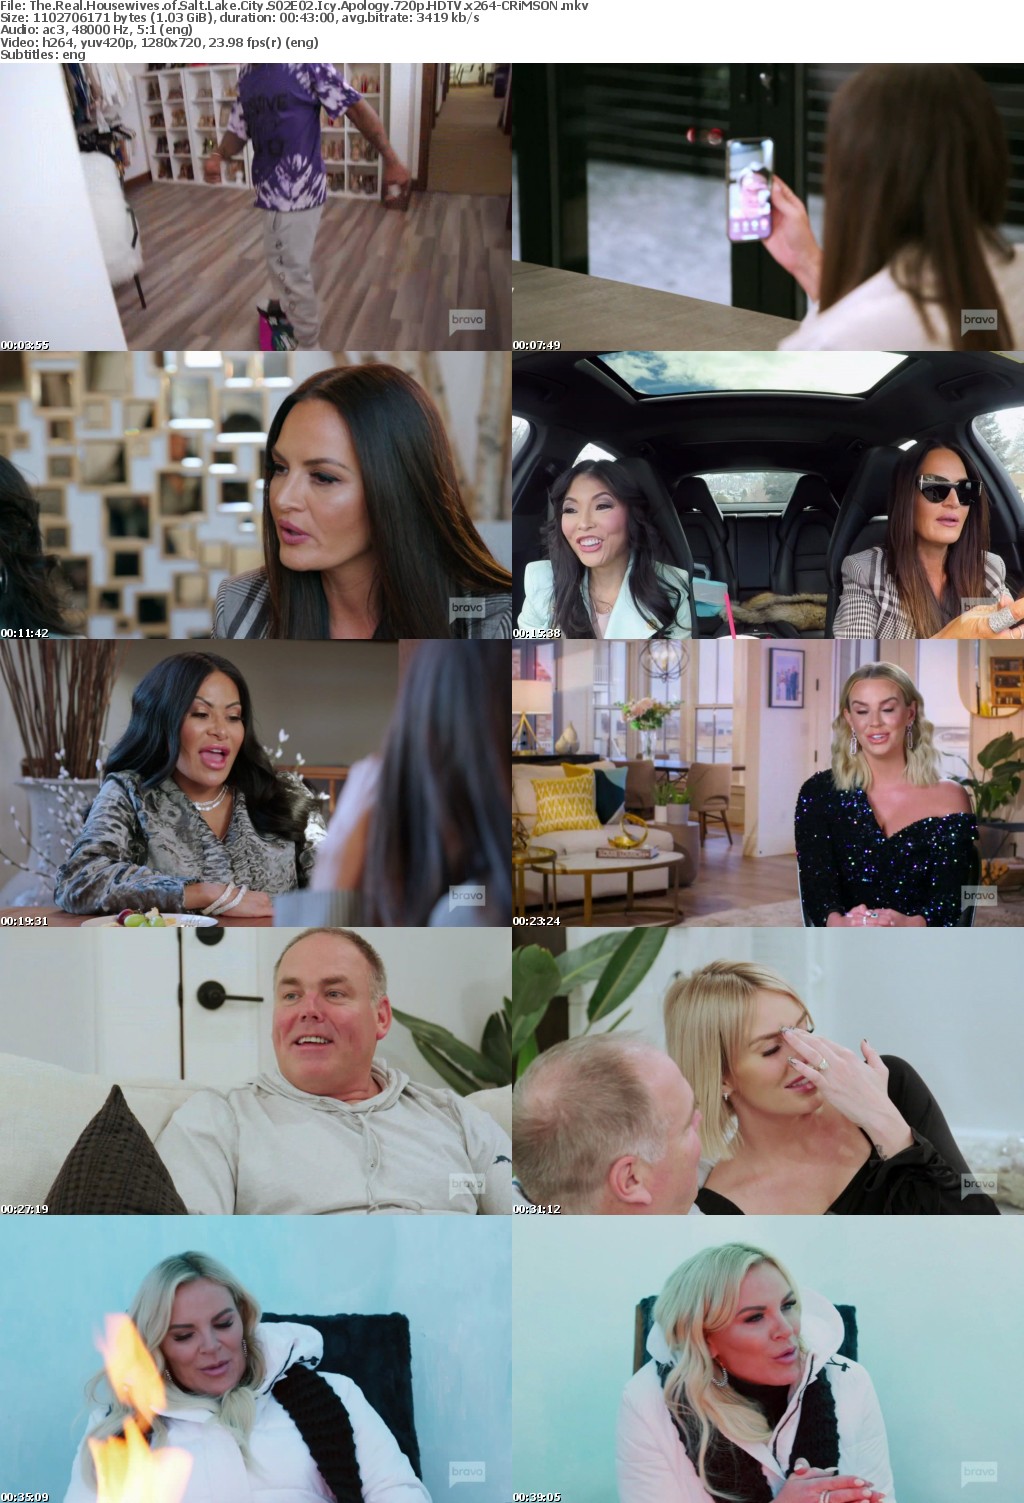 The Real Housewives of Salt Lake City S02E02 Icy Apology 720p HDTV x264-CRiMSON